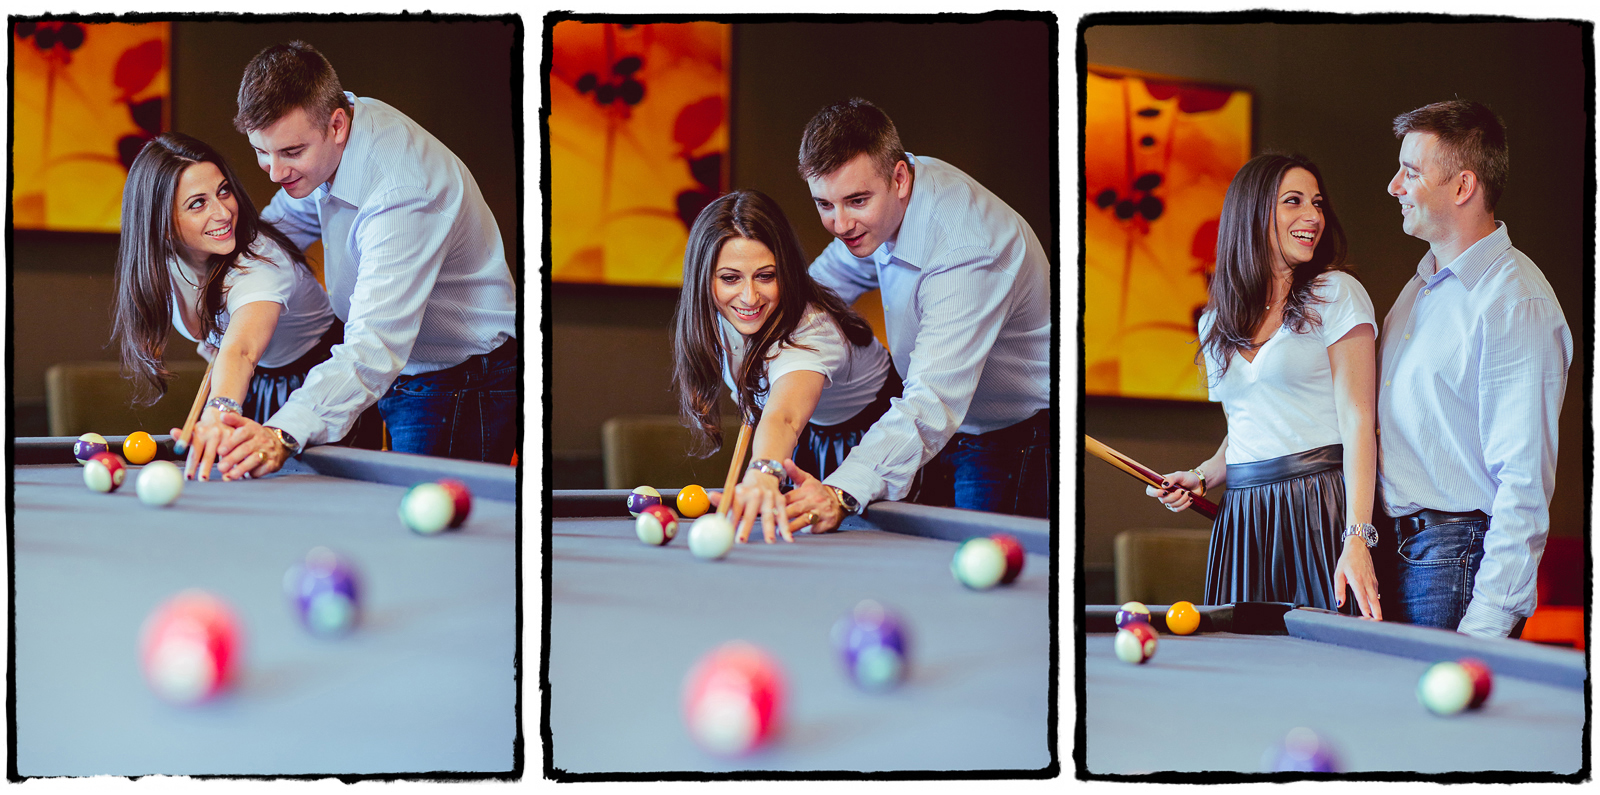 Marisa & Rob's apartment building had a lounge with a pool table, so naturally we got some cute shots of them playing together.